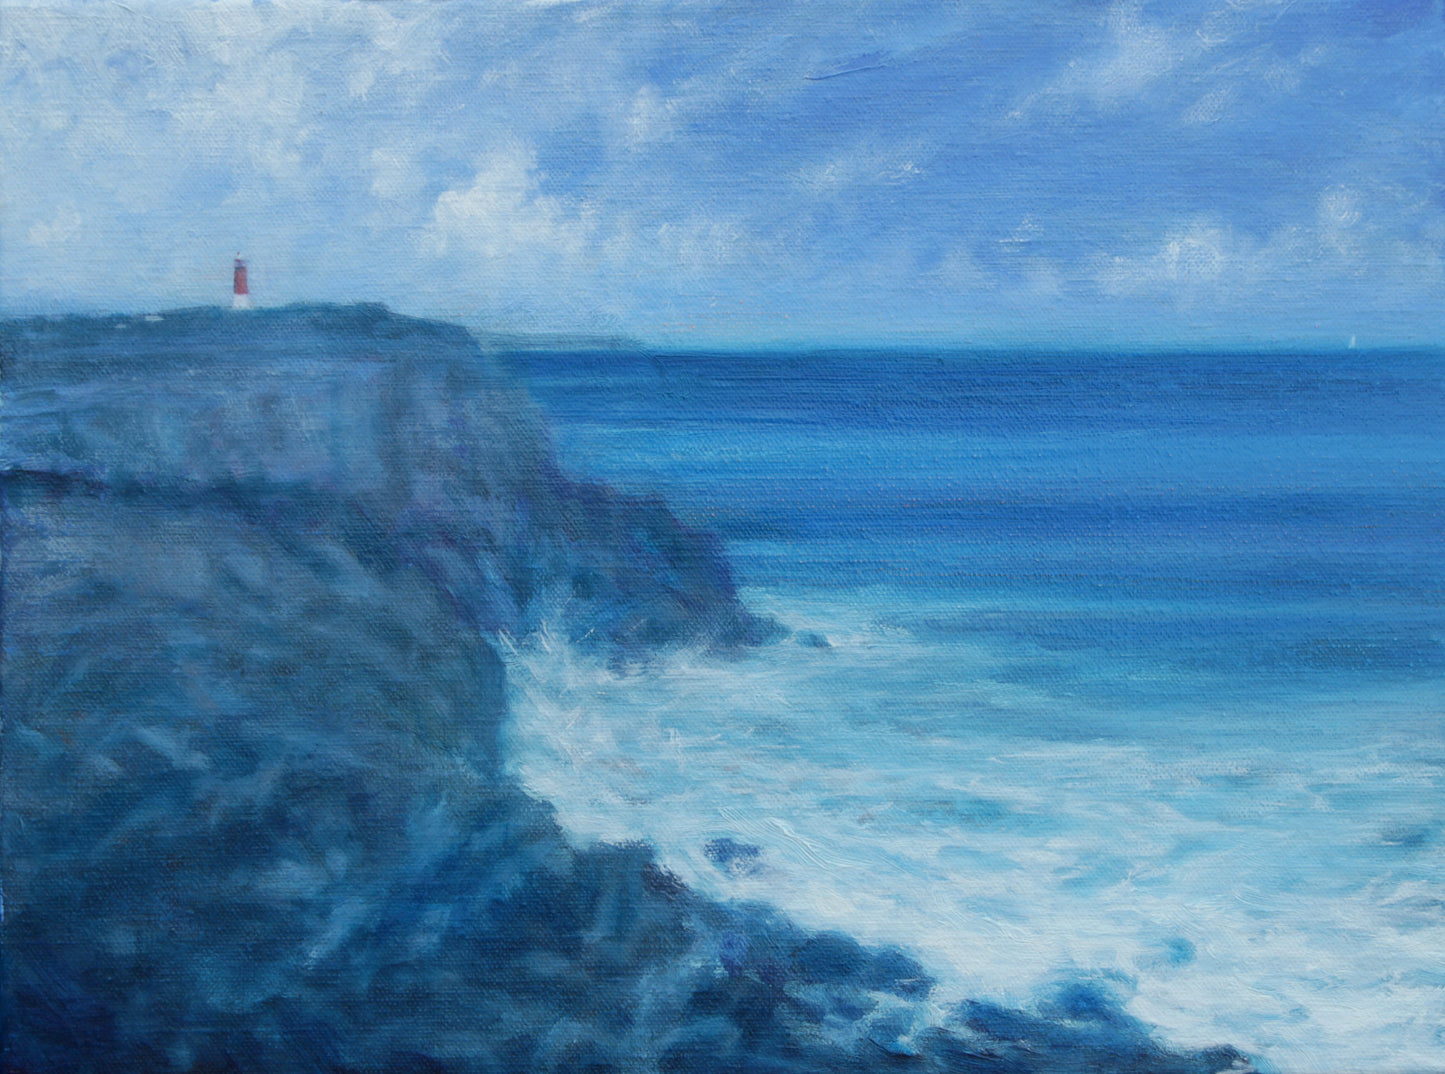 Hole In The Wall Lighthouse. 16ins x 12ins 2016. Seascape painting by Derek Hare